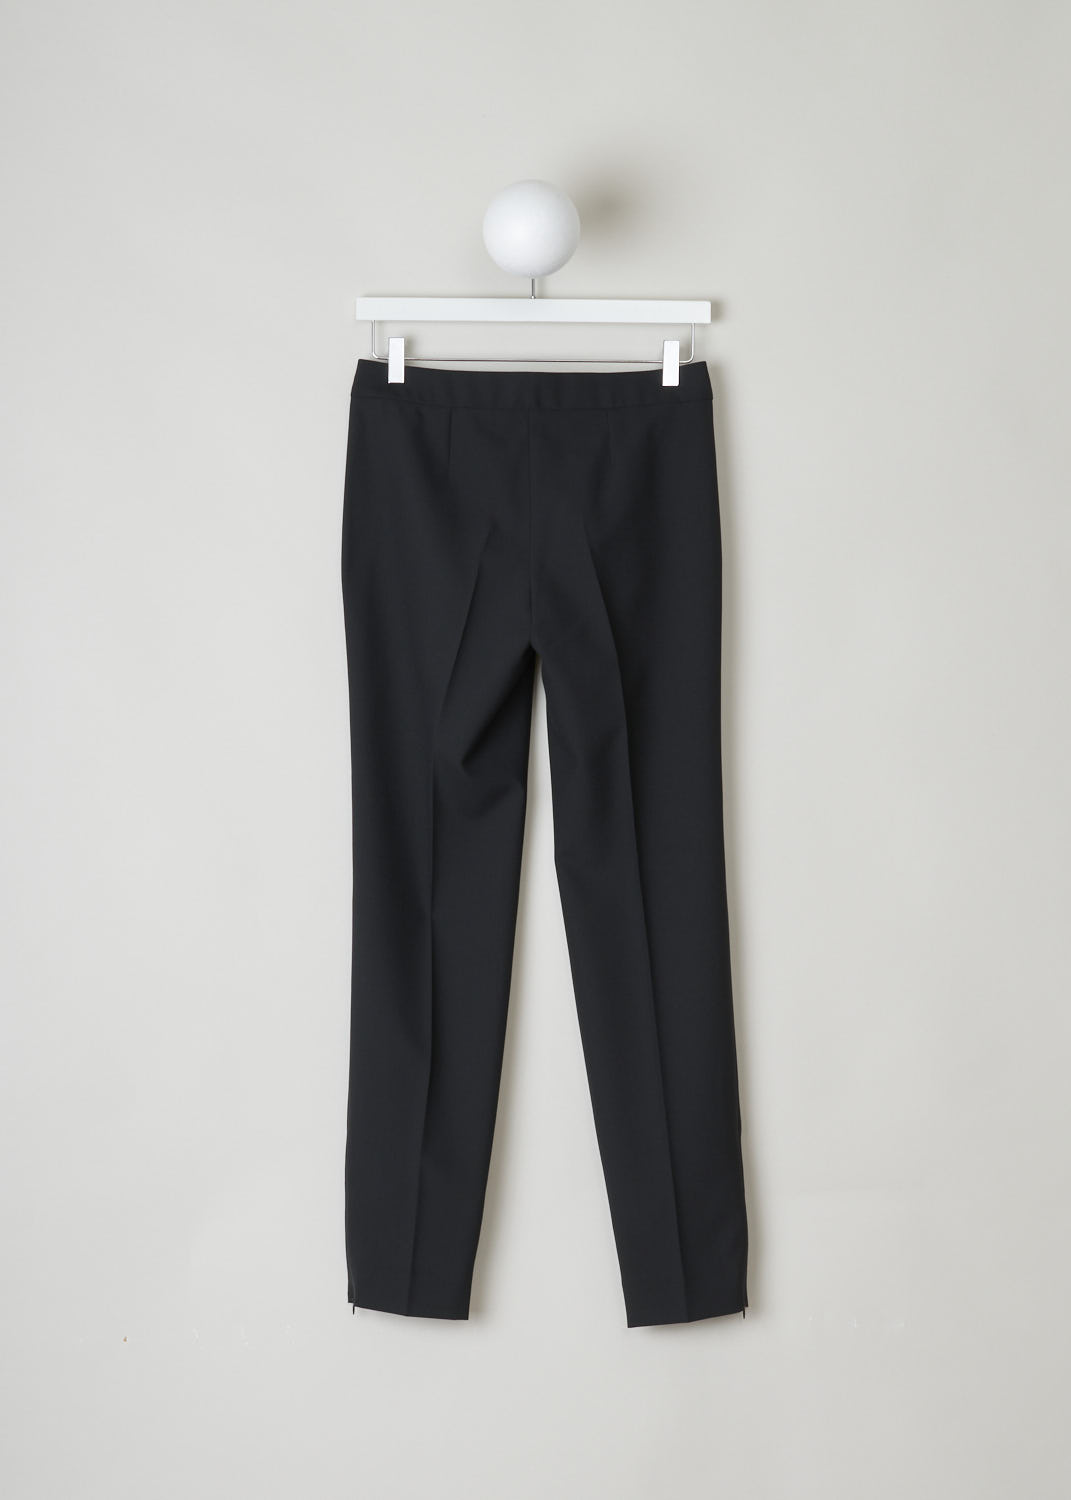 BALENCIAGA, CLASSIC BLACK PANTS WITH SUBTLE ZIPPER DETAIL, 329181_TCJ69_1000, Black, Back, This classic black pants has front creases along the length of the legs. These same creases can also be found on the back of the legs. On the front, welt pockets can be found on either side. On the ends of the legs, concealed zippers can be found that open to about ankle height.
